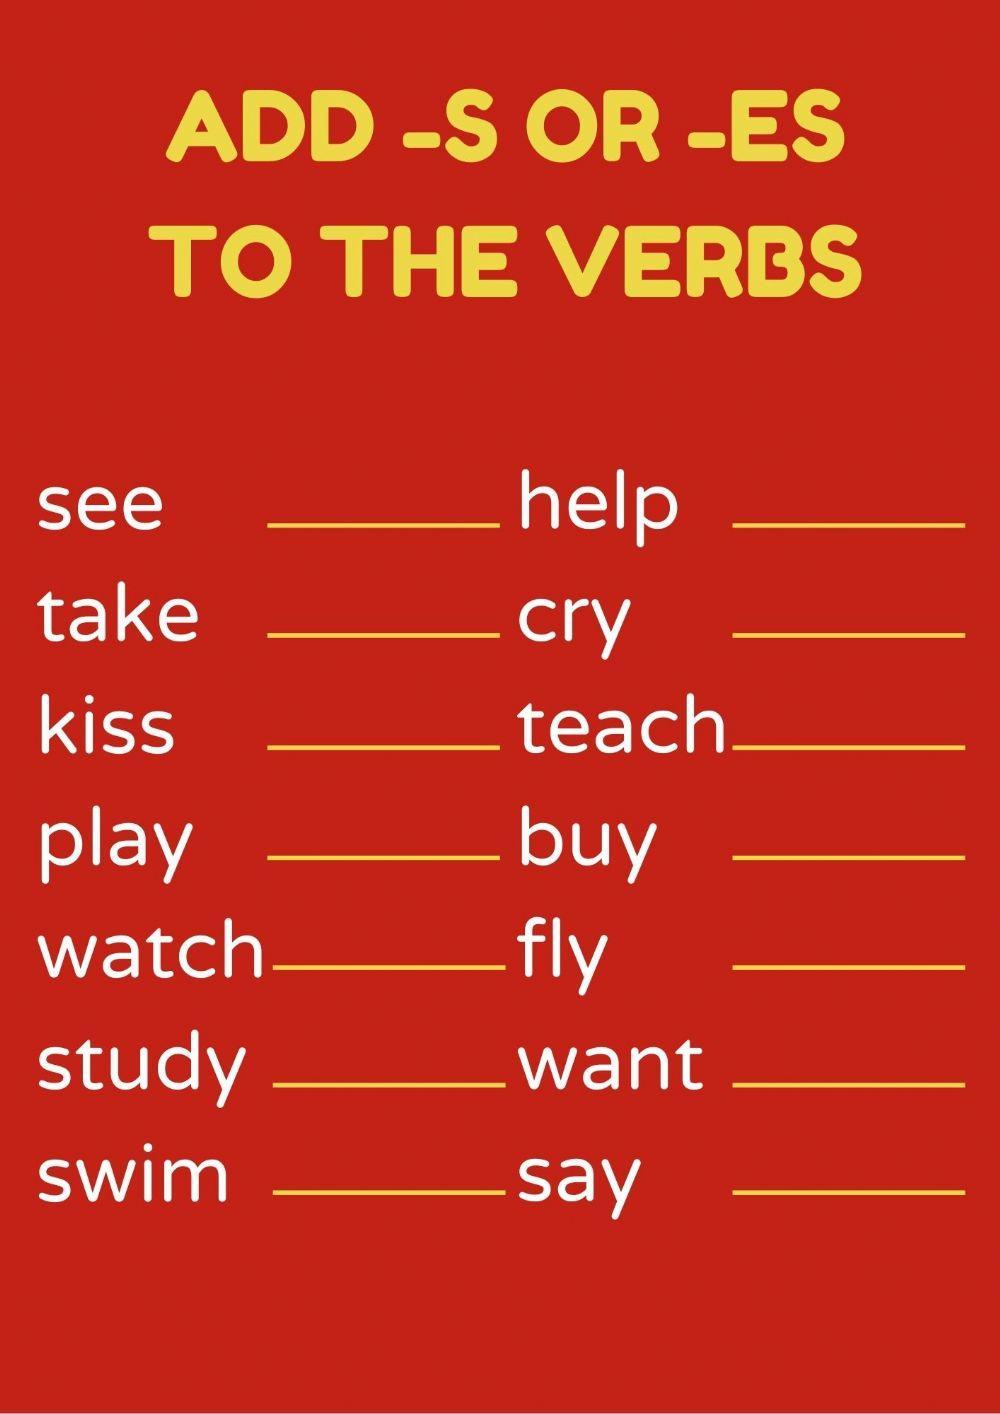 Add -s or -es to the verbs